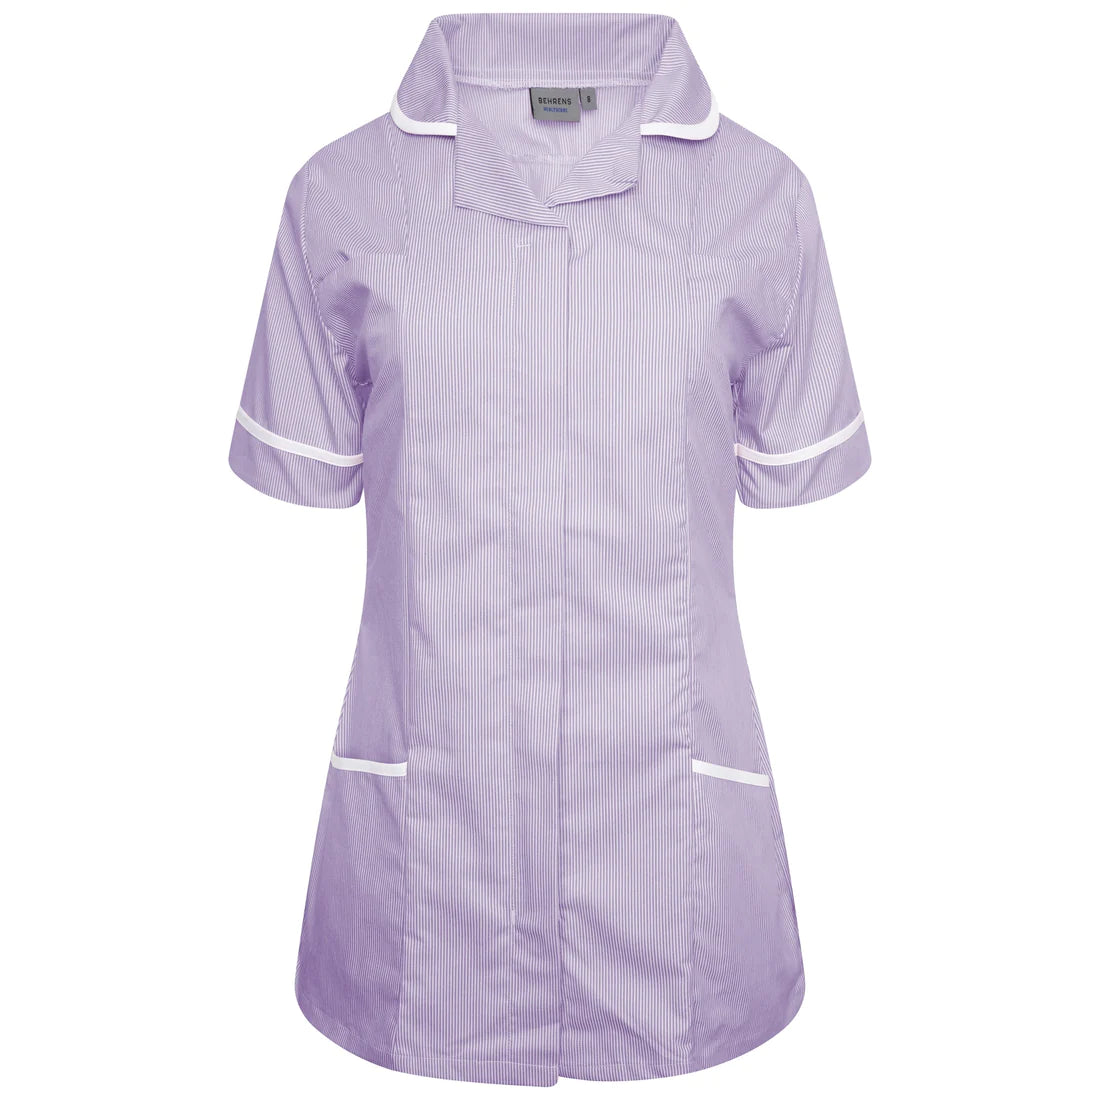 Lilac/White stripe/ White Contrast Ladies Tunic with Round Collar - NCLTPS